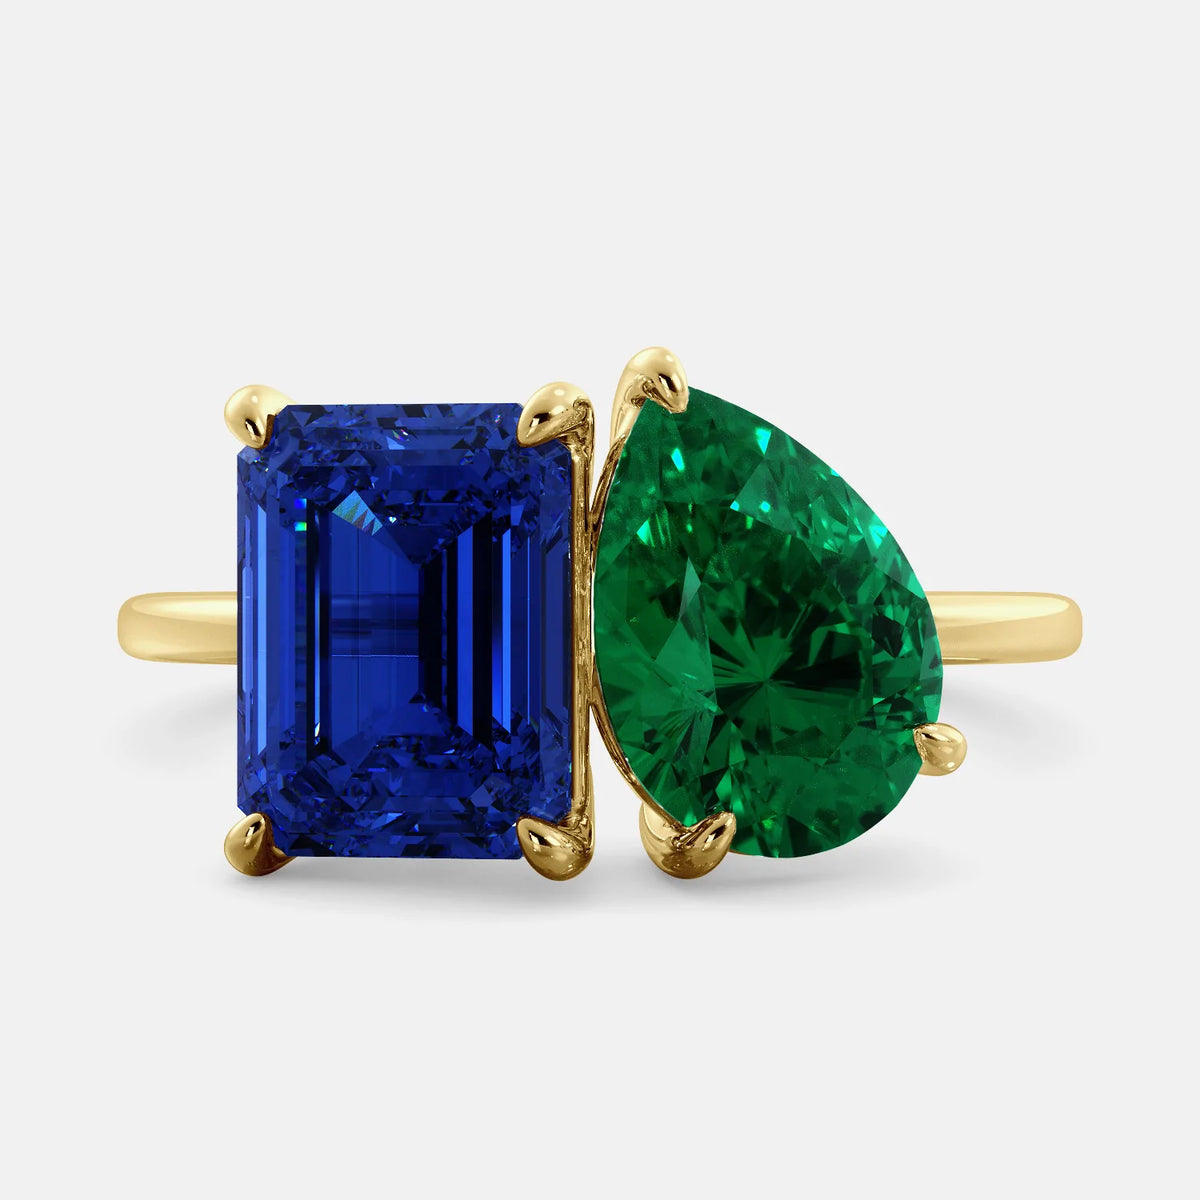 This image shows a toi et moi ring with a pear-shaped emerald and an emerald-cut blue sapphire. The ring is set in a 14k yellow gold band and is available in all sizes. The blue sapphire is a precious gemstone that is said to promote loyalty, wisdom, and truth. The emerald is a precious gemstone that is said to promote love, compassion, and forgiveness. The toi et moi ring is a beautiful and unique way to show your love and commitment to someone special.